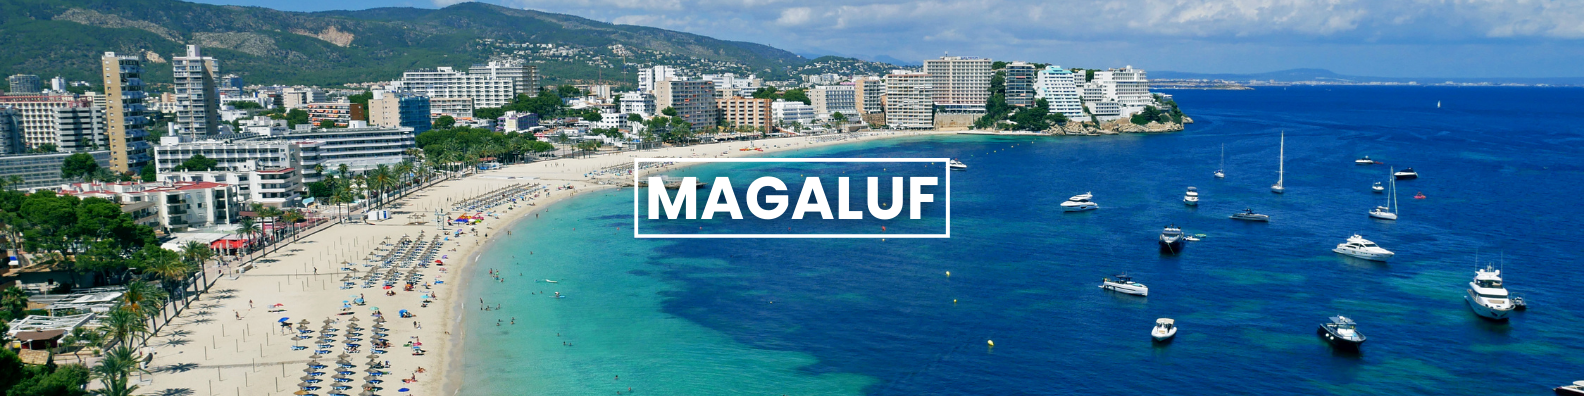 an aerial view of a beach with the word magaluf on it Barter's Travelnet 